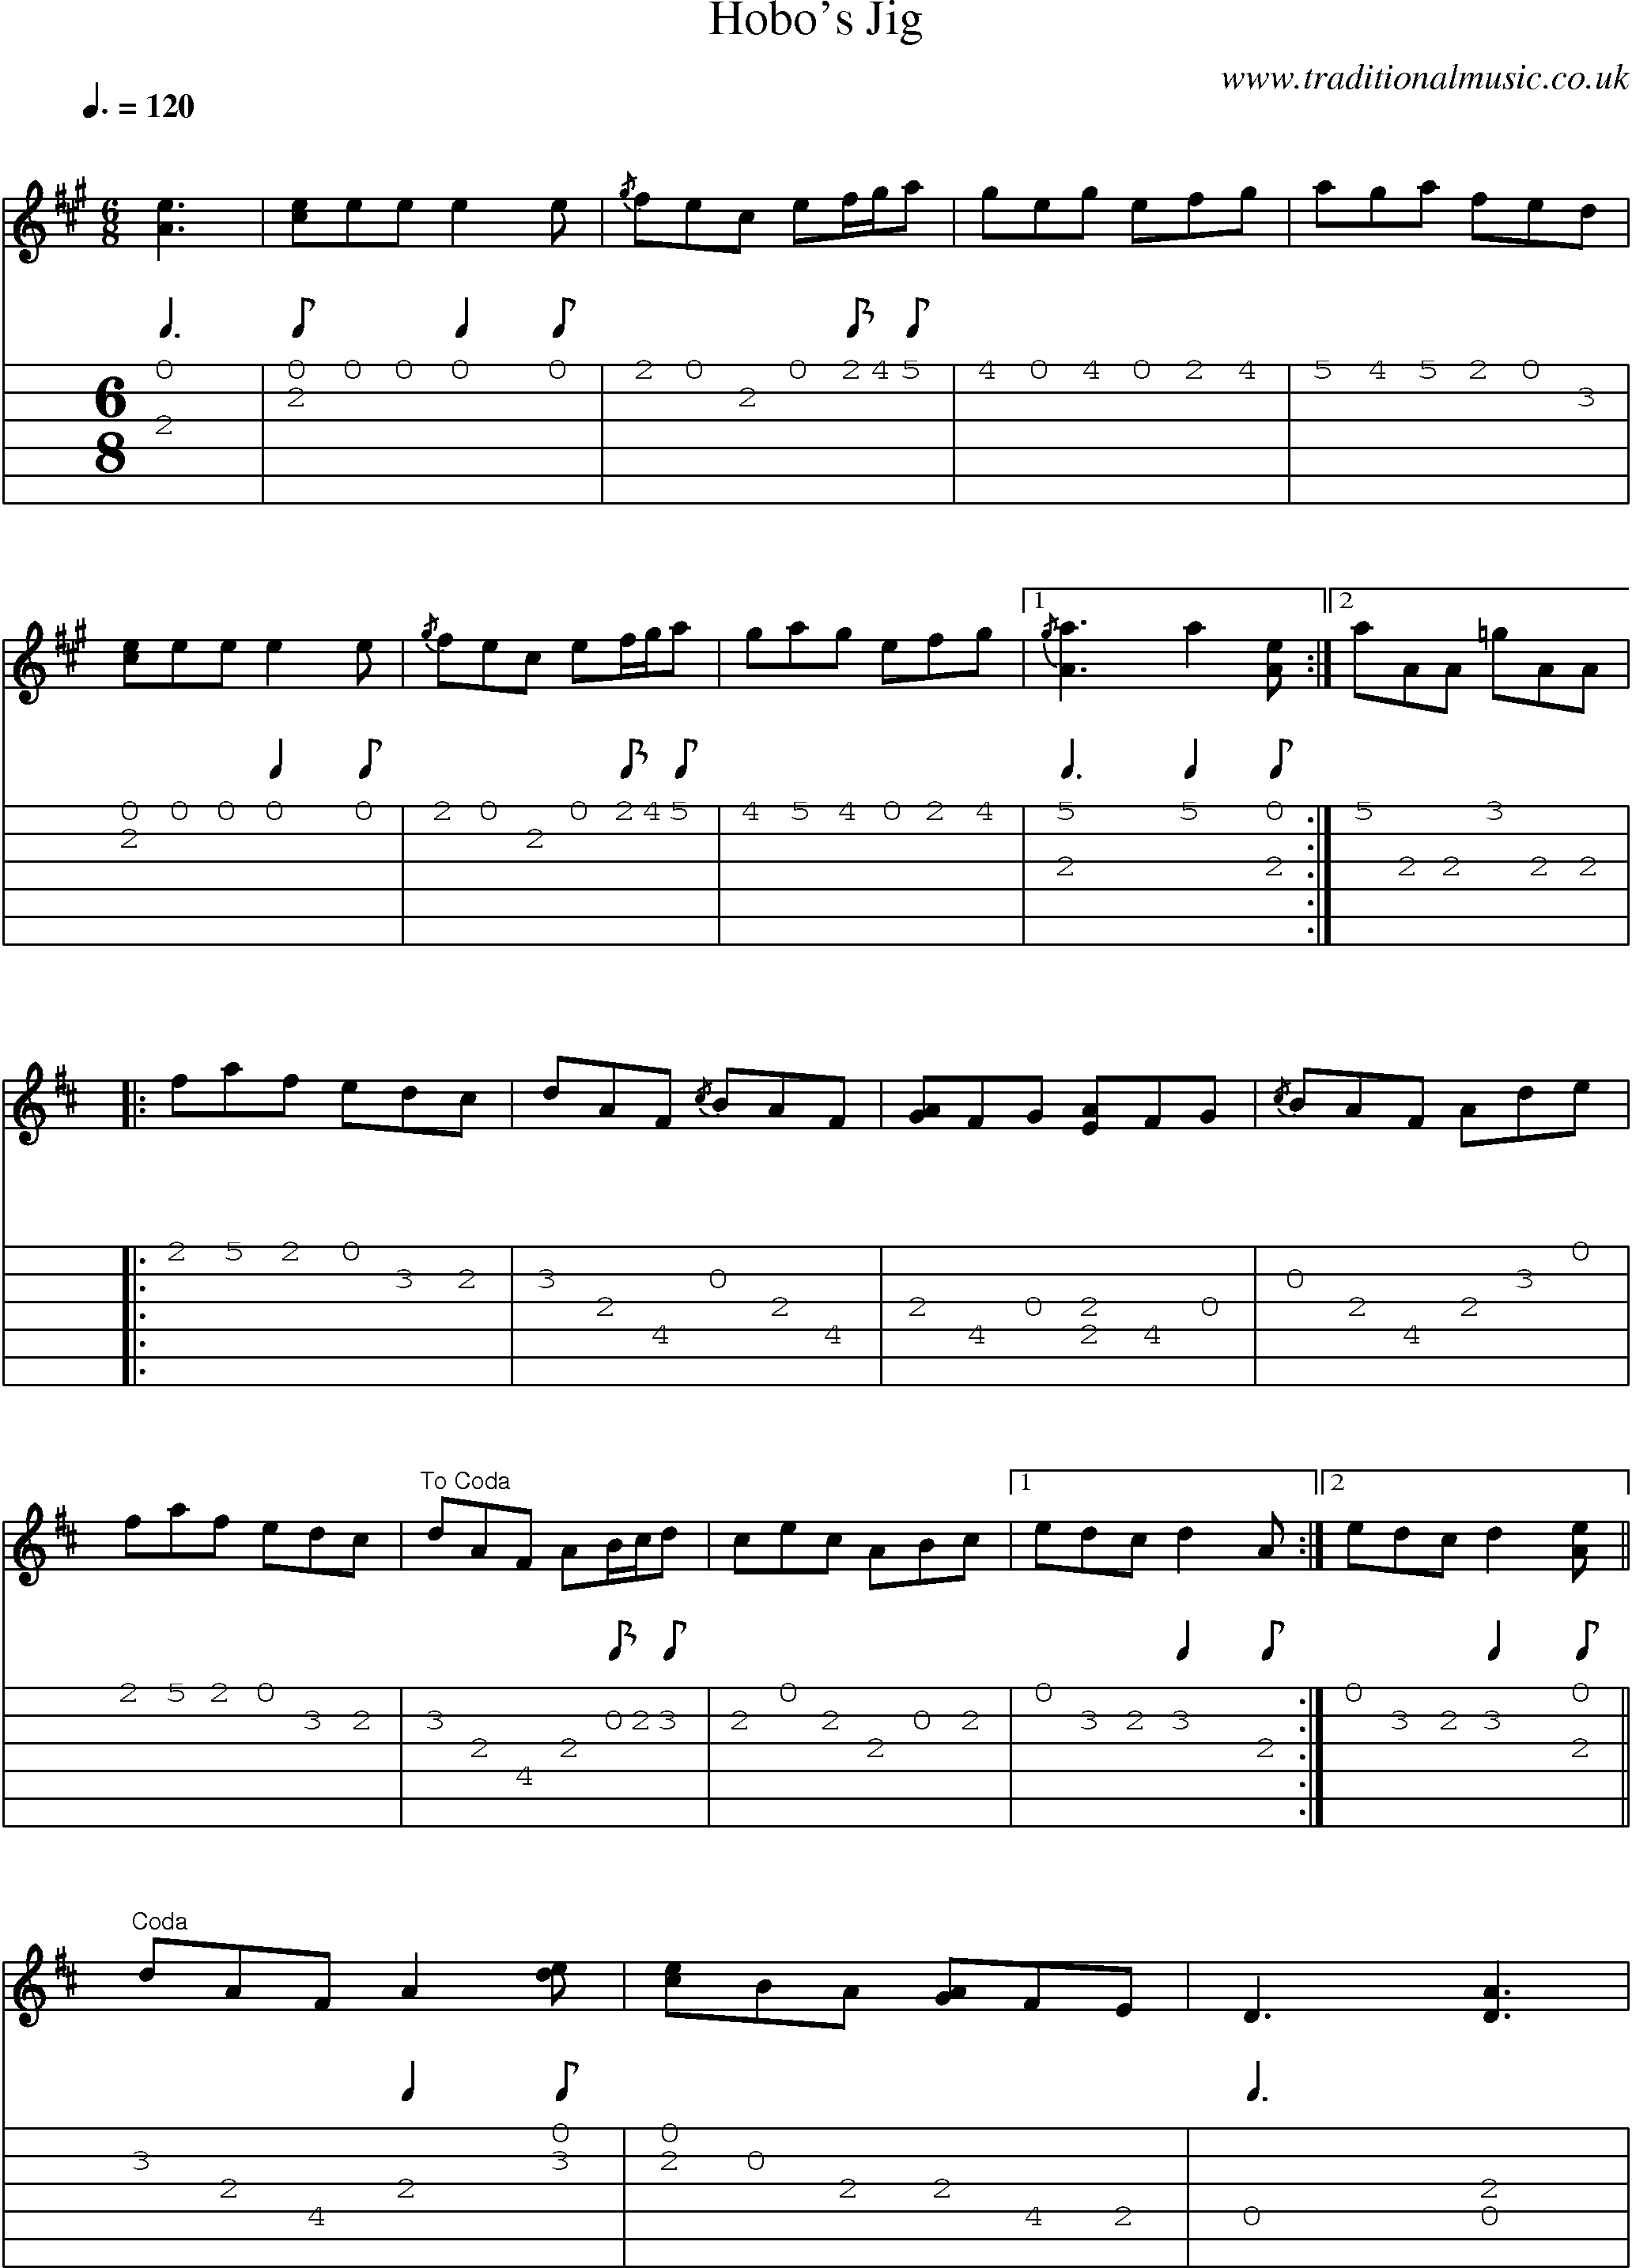 Music Score and Guitar Tabs for Hobos Jig